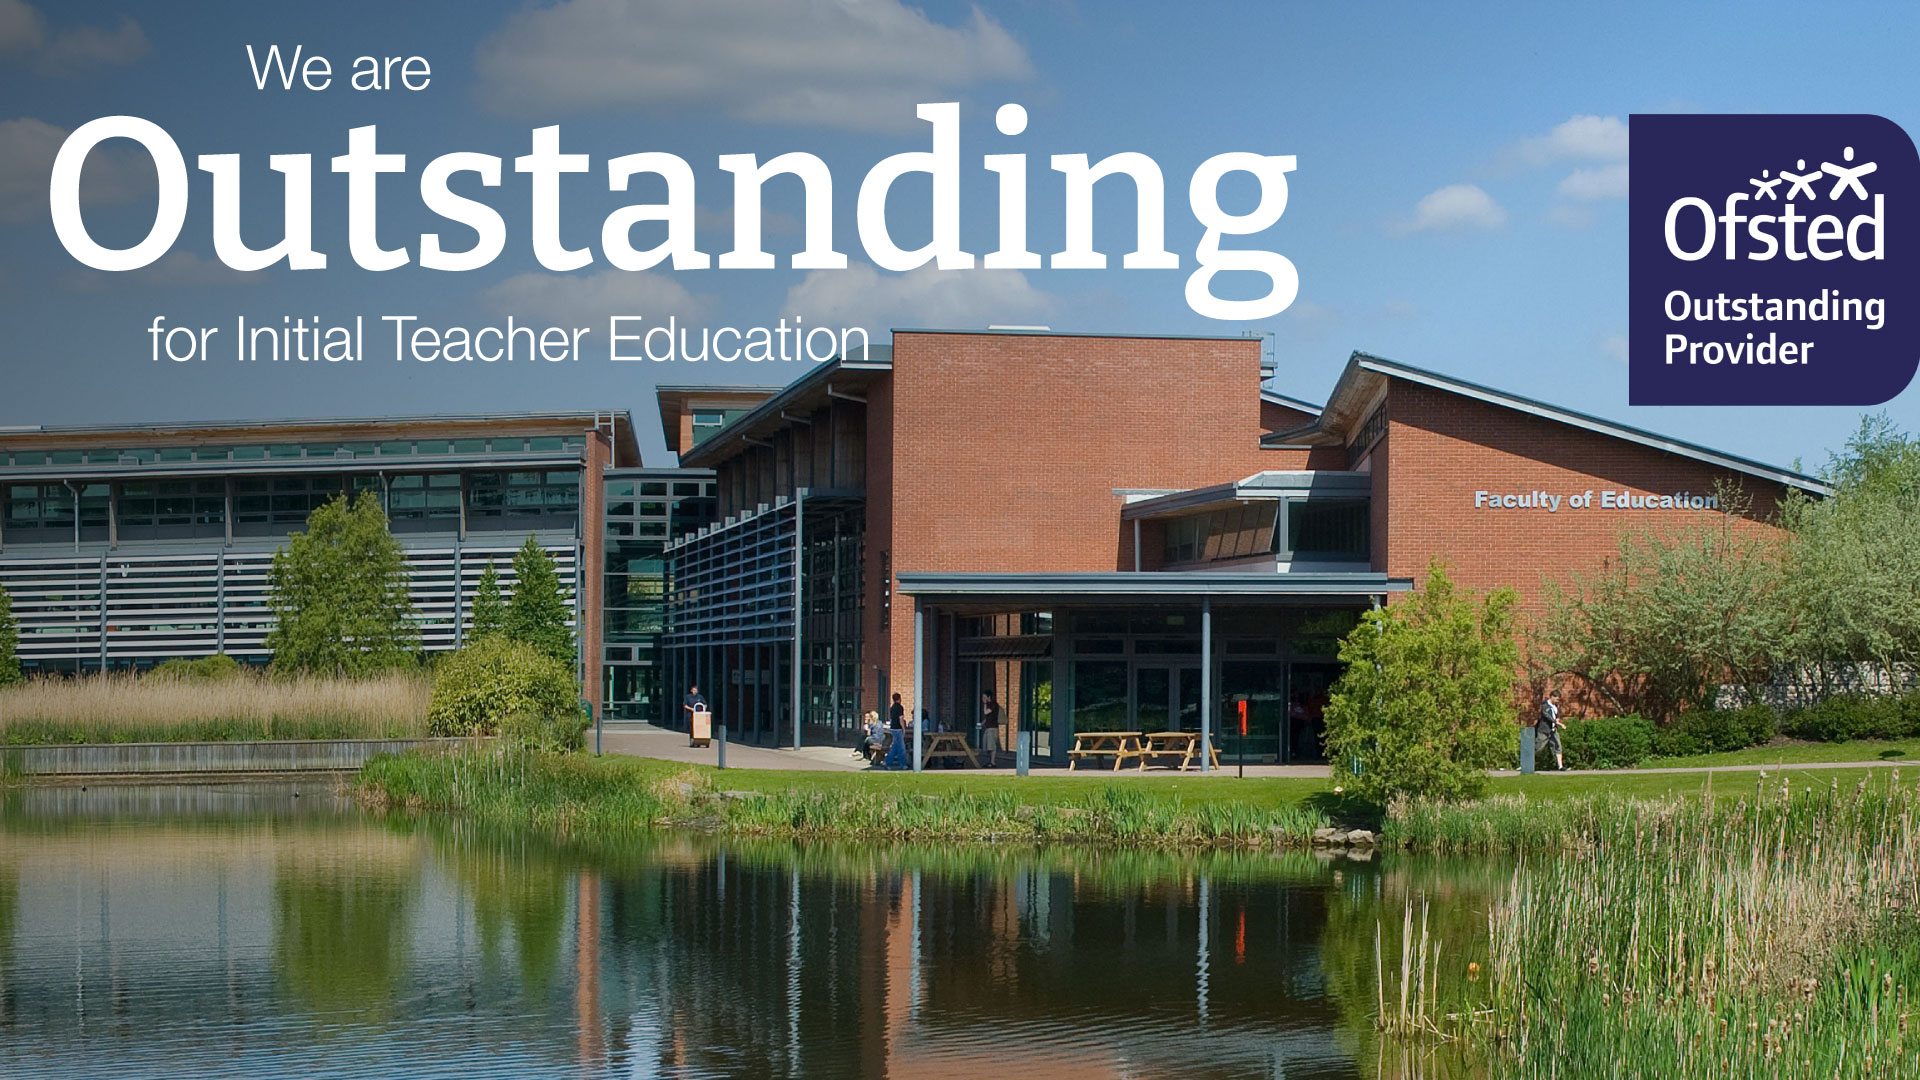 We are outstanding for initial teacher education